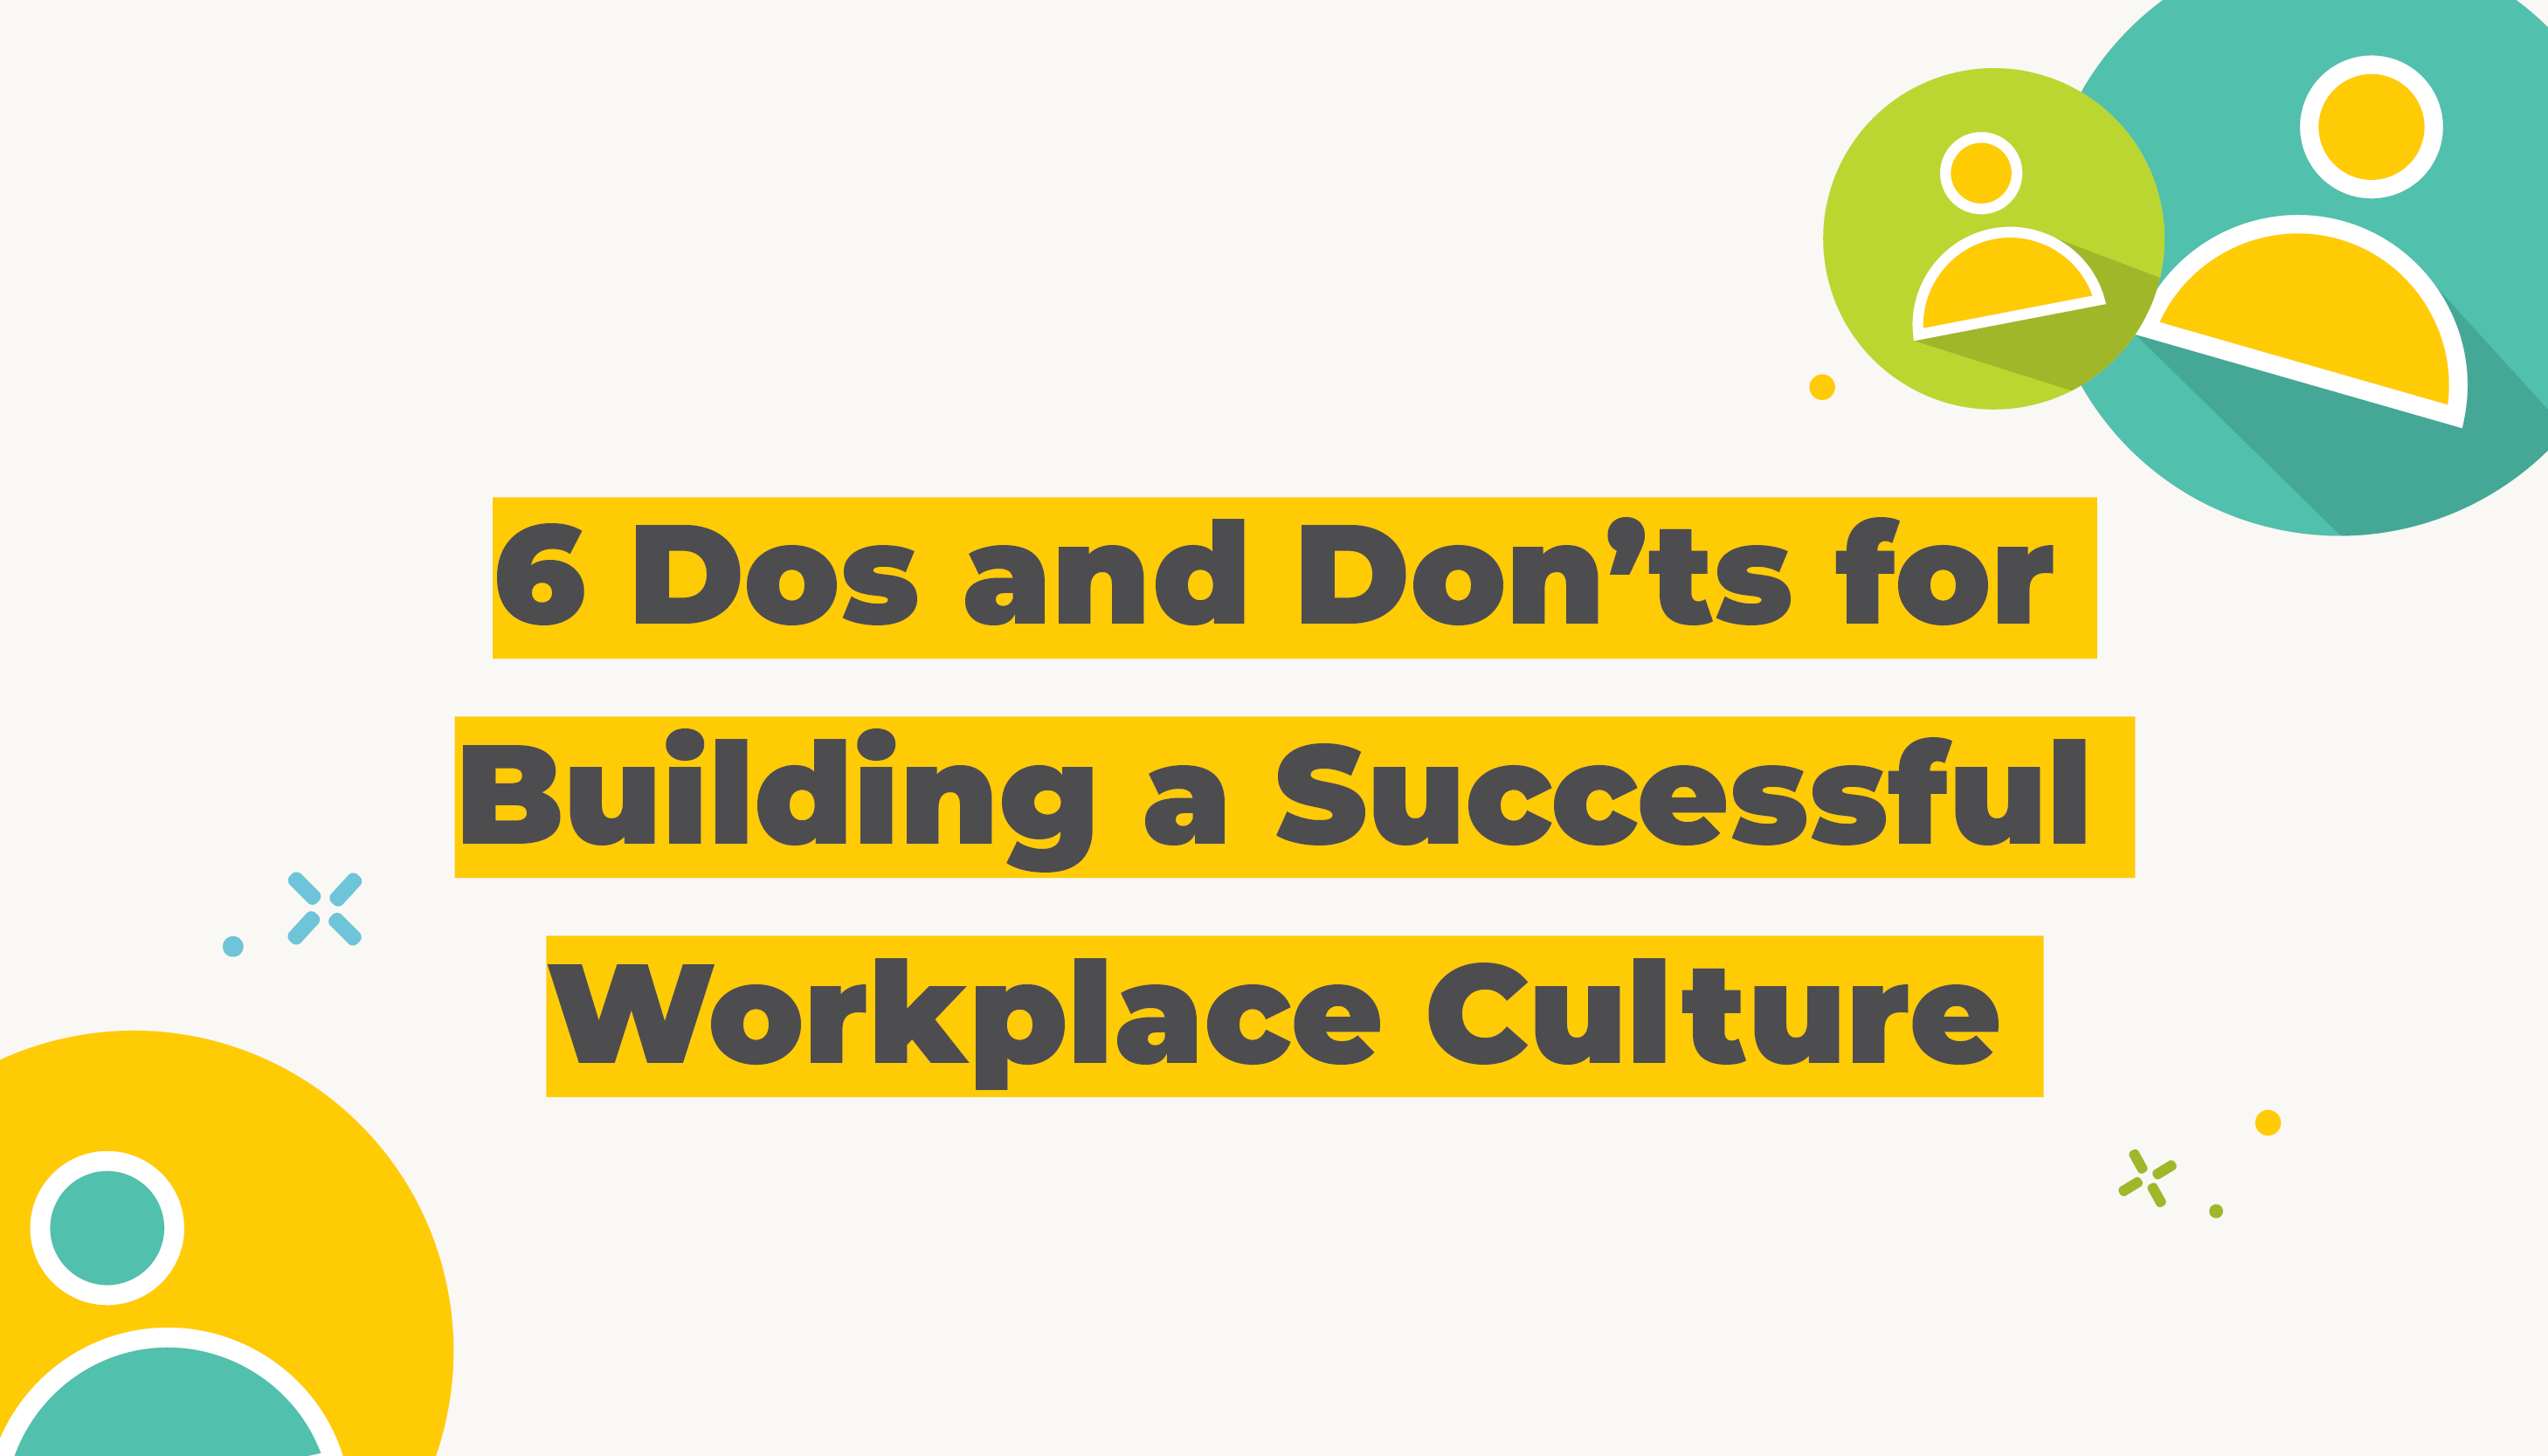 6 Dos and Don'ts for Buildinga Successful Workplace Culture